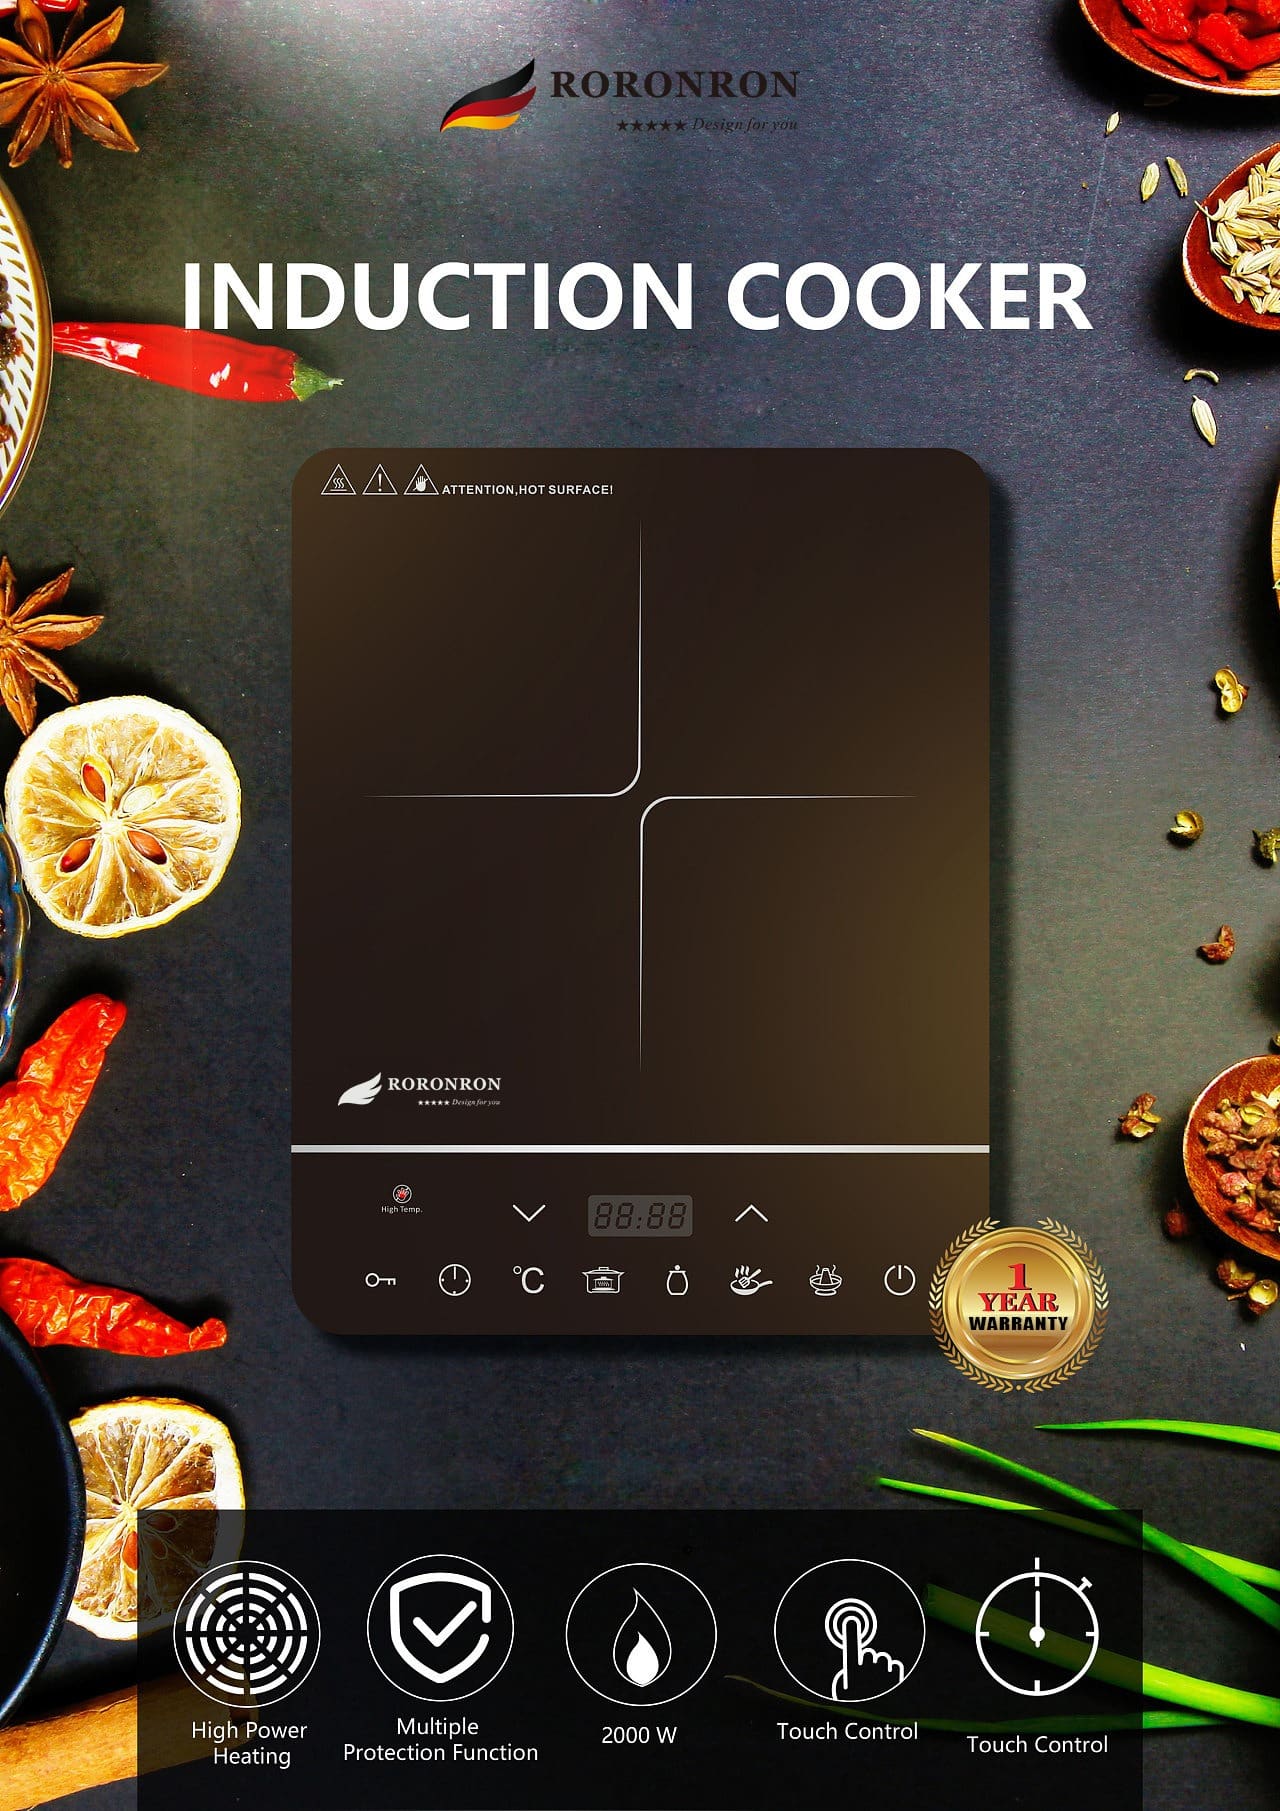 Induction cooker 6